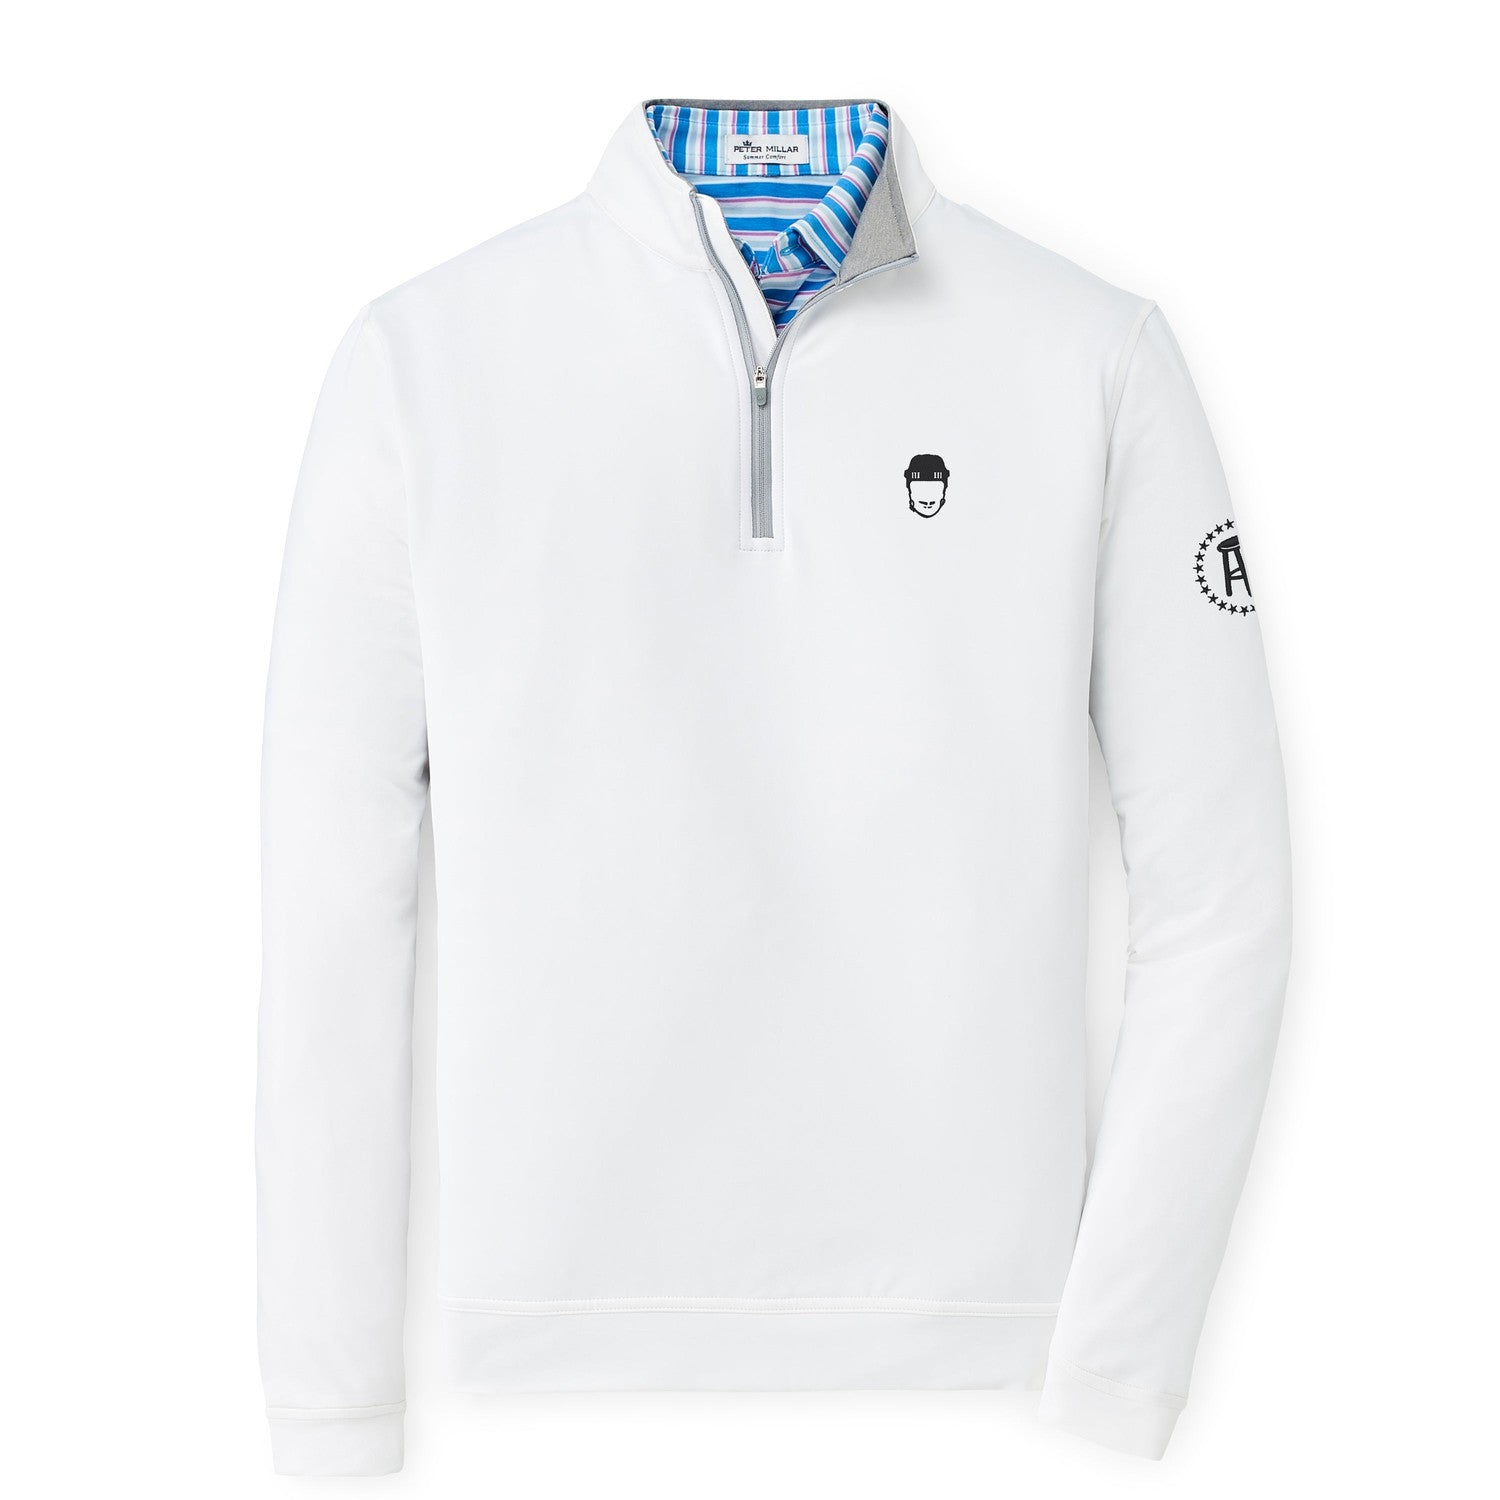 Peter Millar x Spittin Chiclets Perth Stretch Loop Terry Quarter Zip-Pullovers-Spittin Chiclets-White-S-Barstool Sports